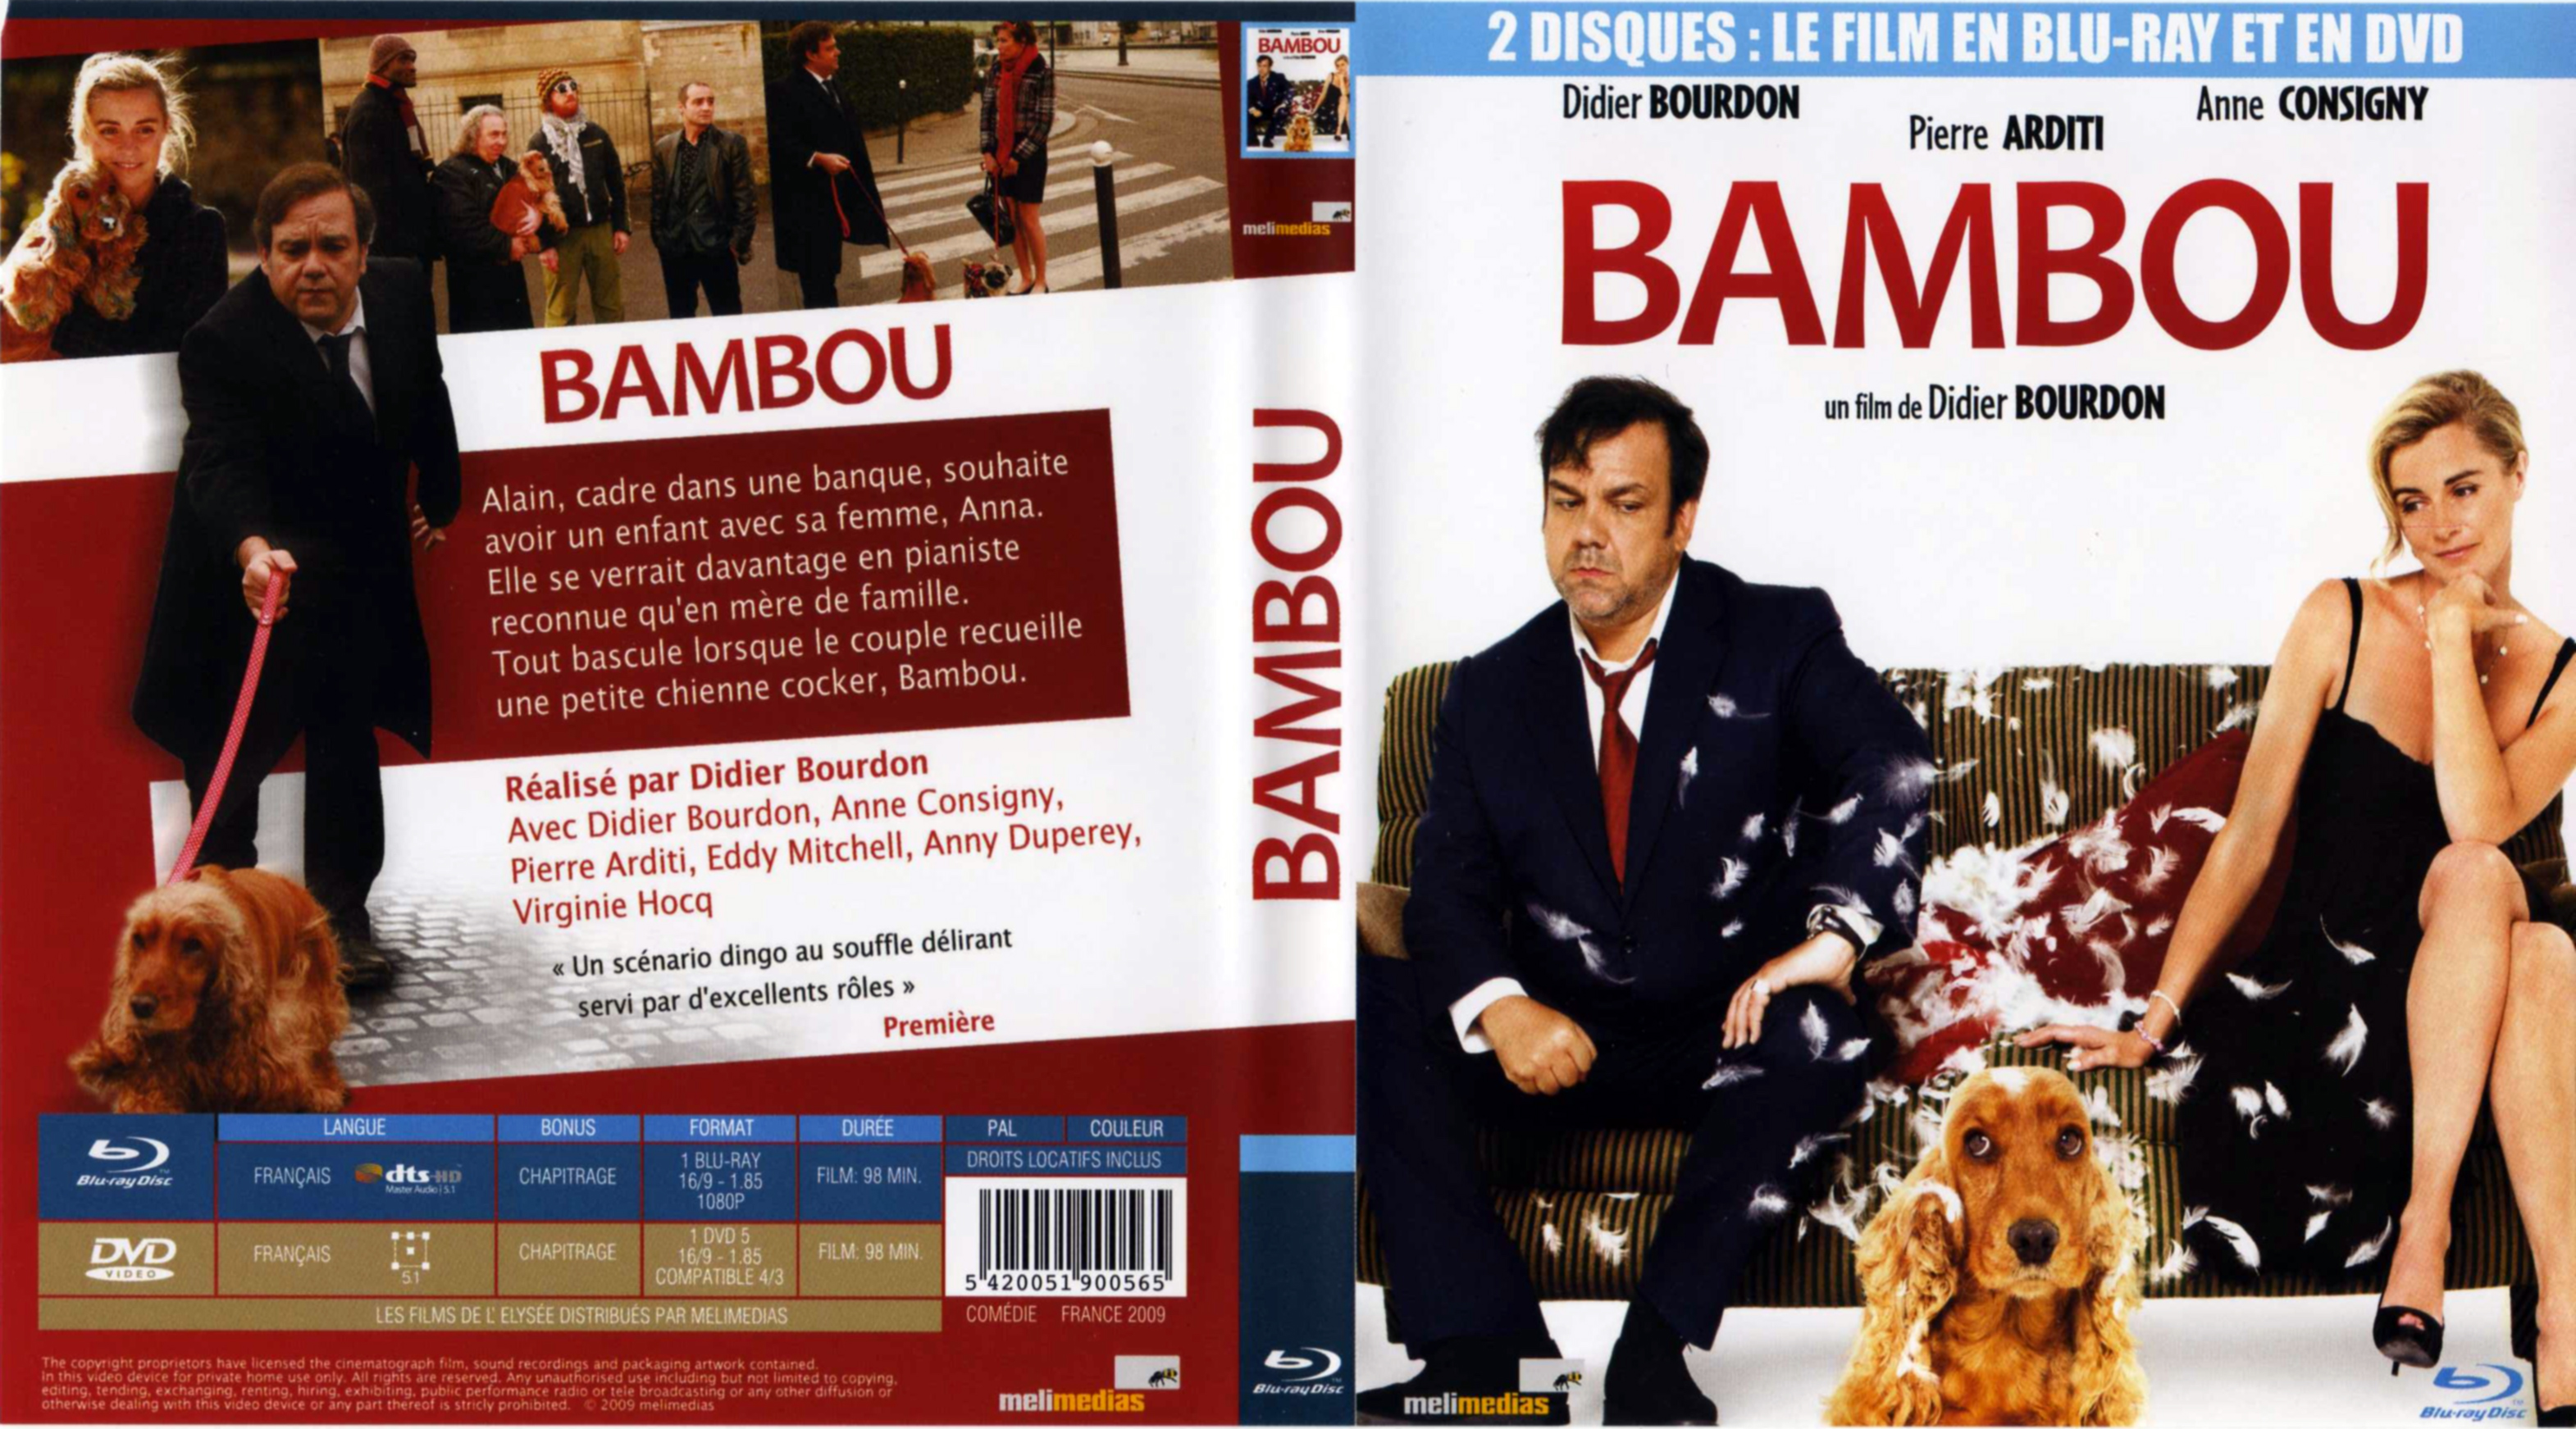 Jaquette DVD Bambou (BLU-RAY)